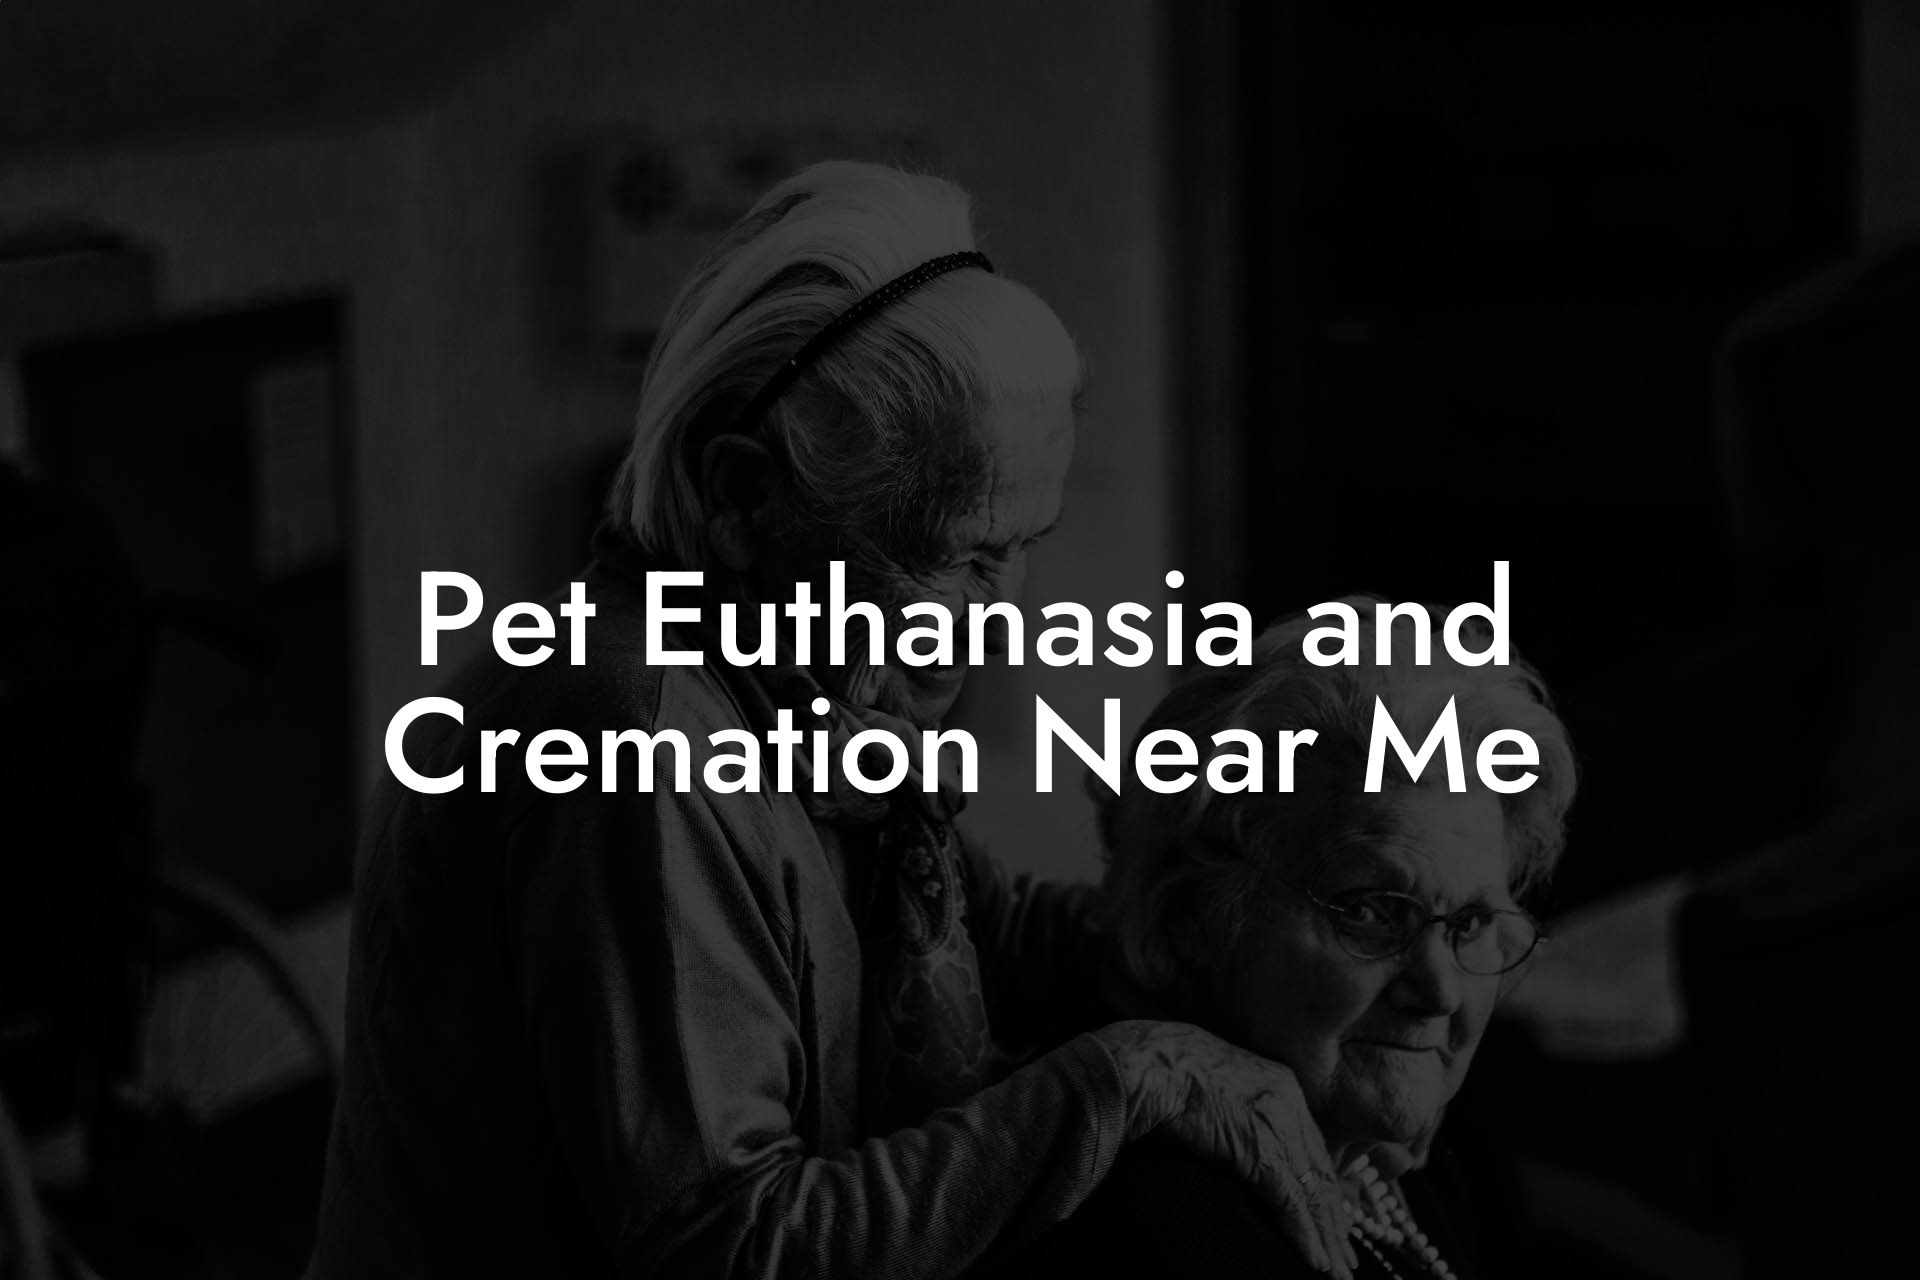 Pet Euthanasia and Cremation Near Me